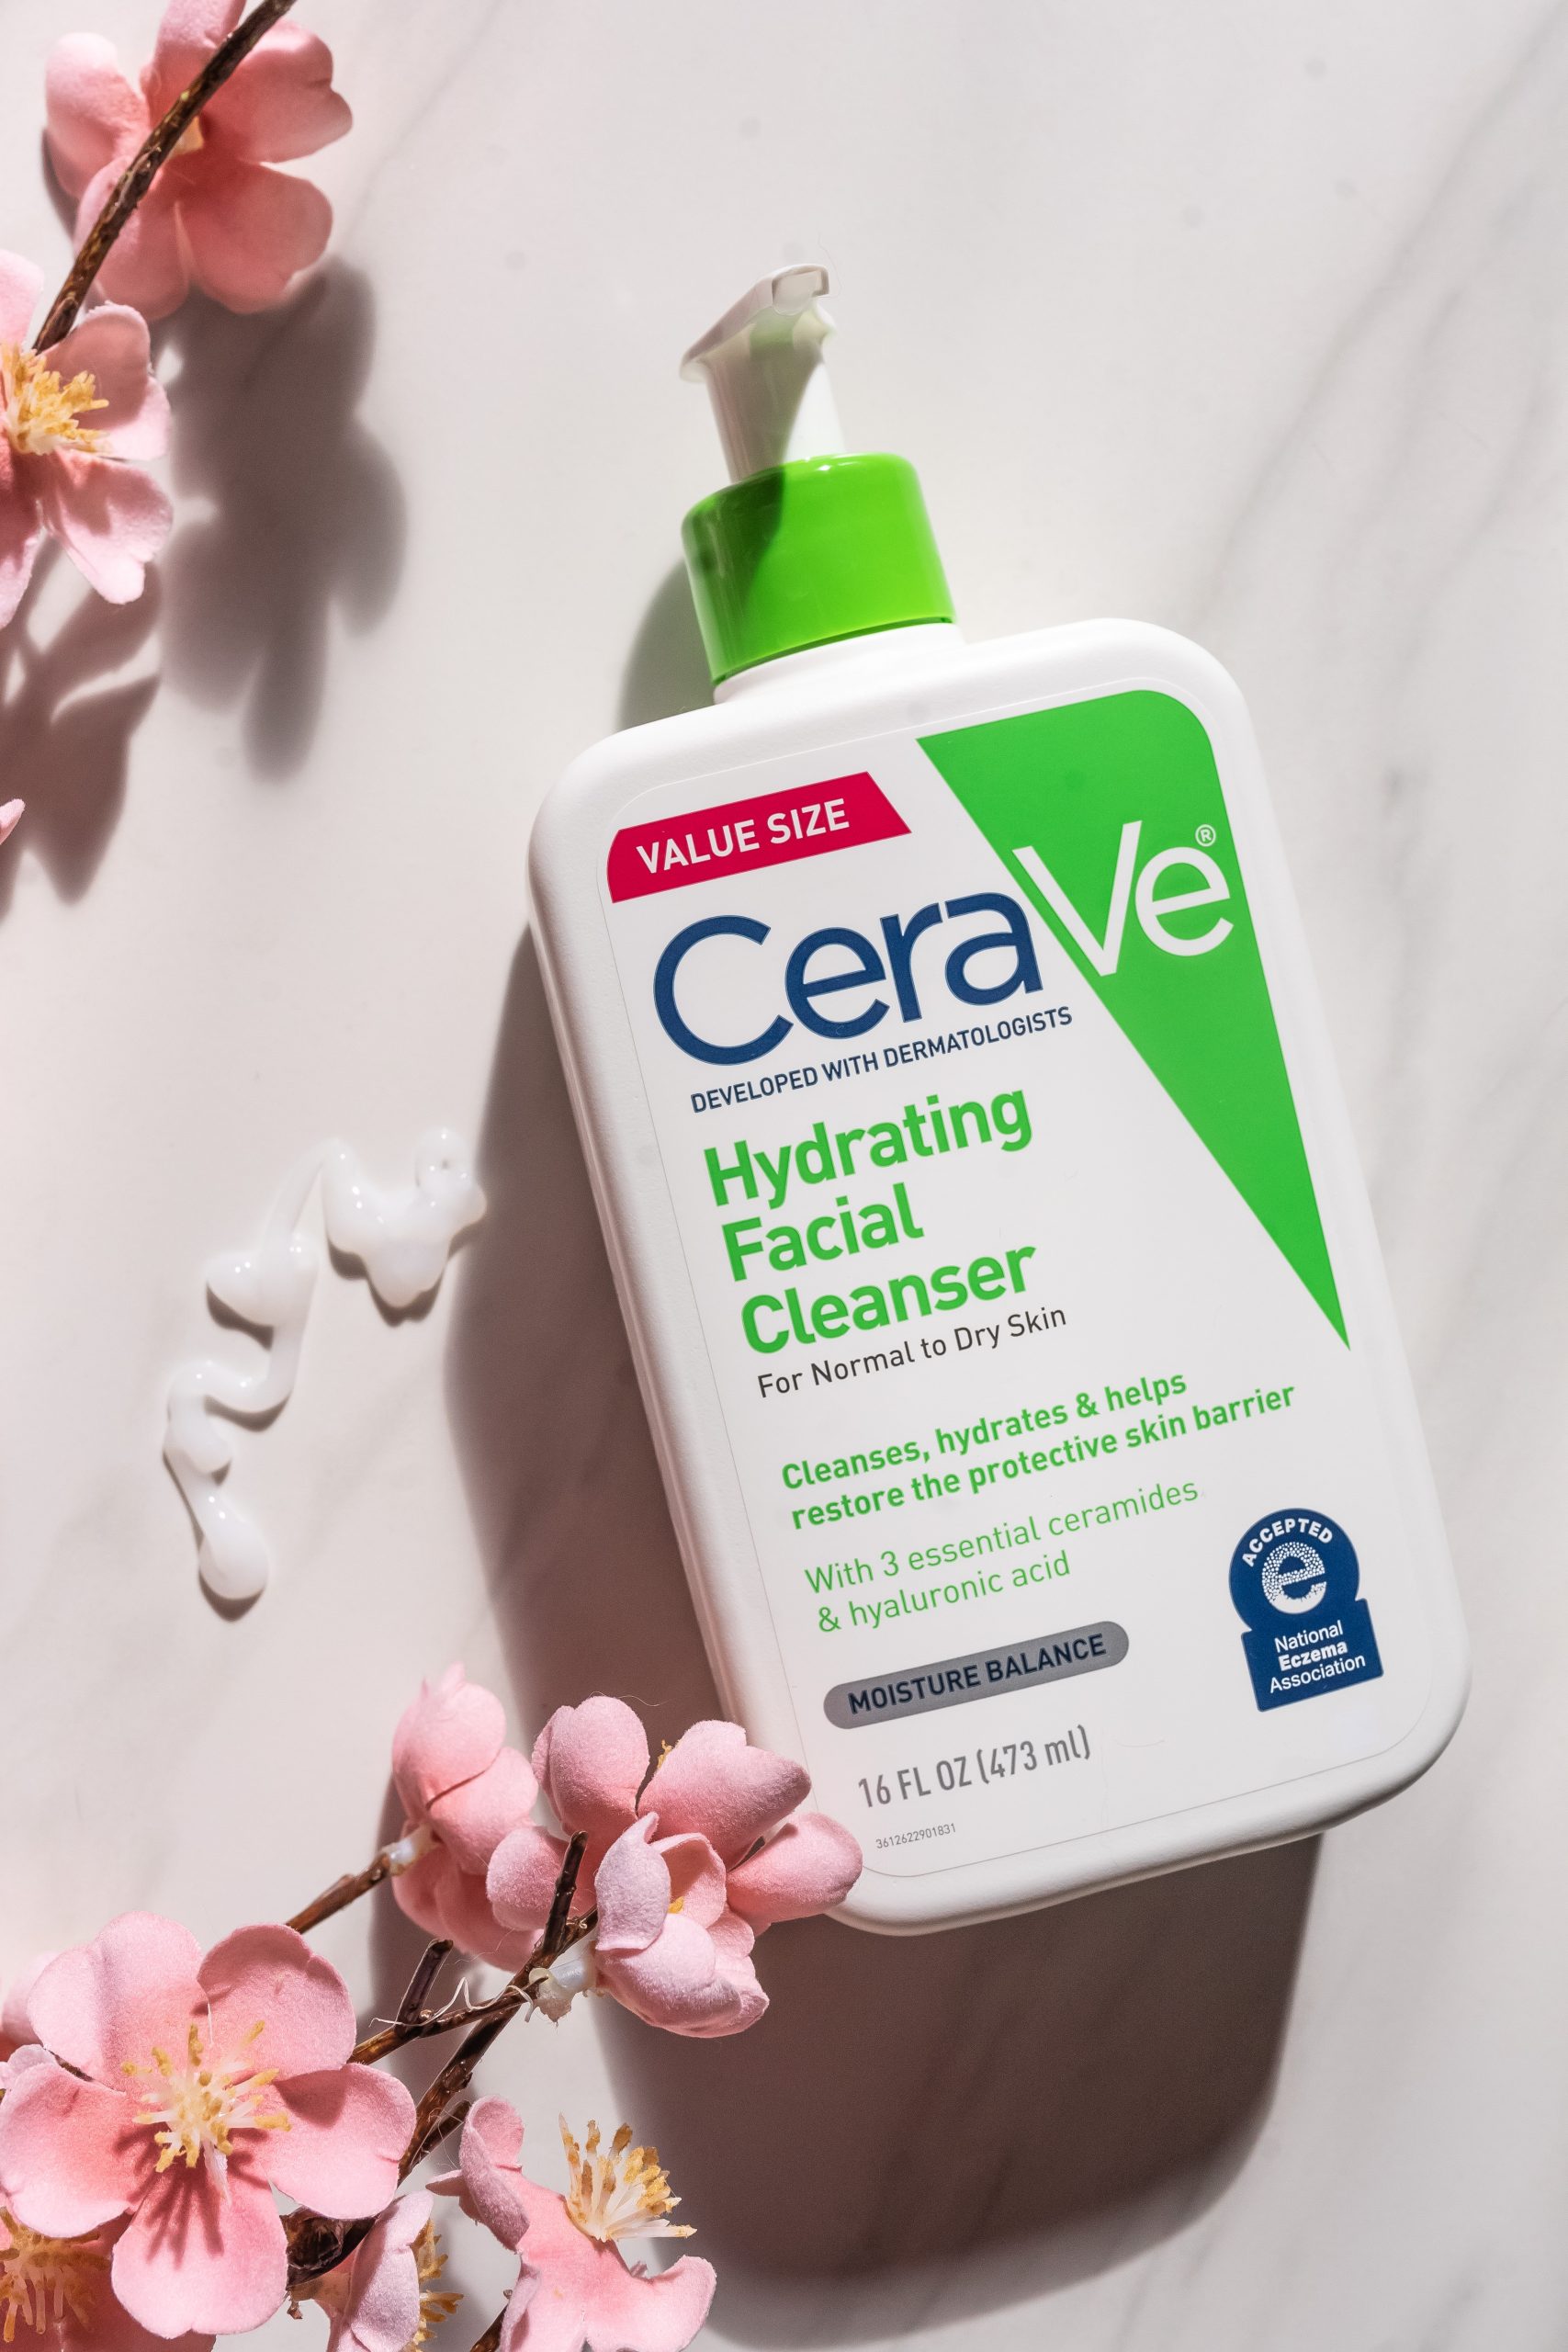 Cerave hydrating cleanser